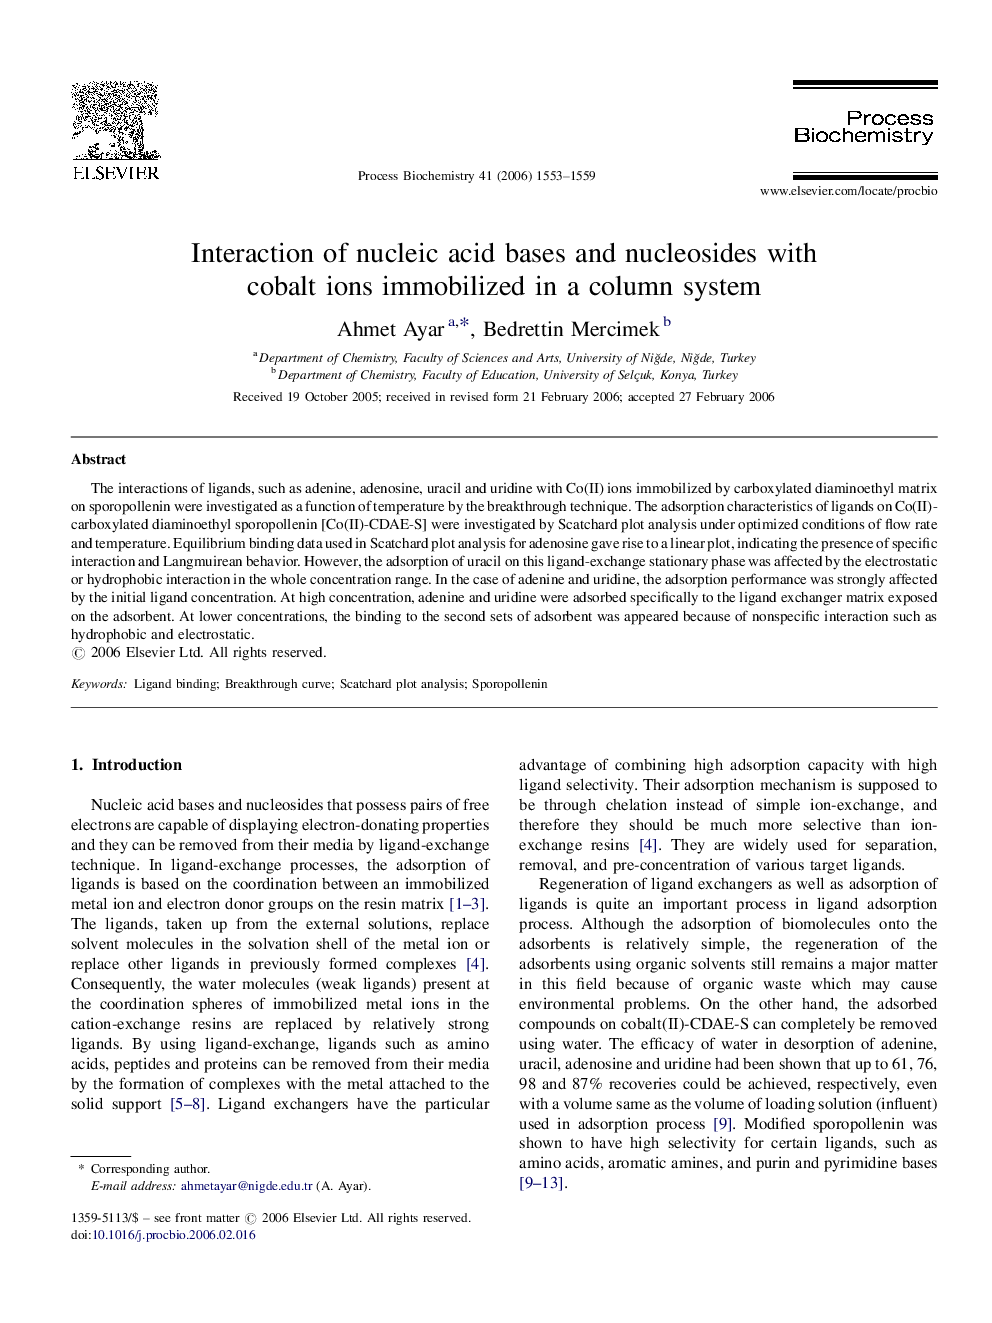 Interaction of nucleic acid bases and nucleosides with cobalt ions immobilized in a column system